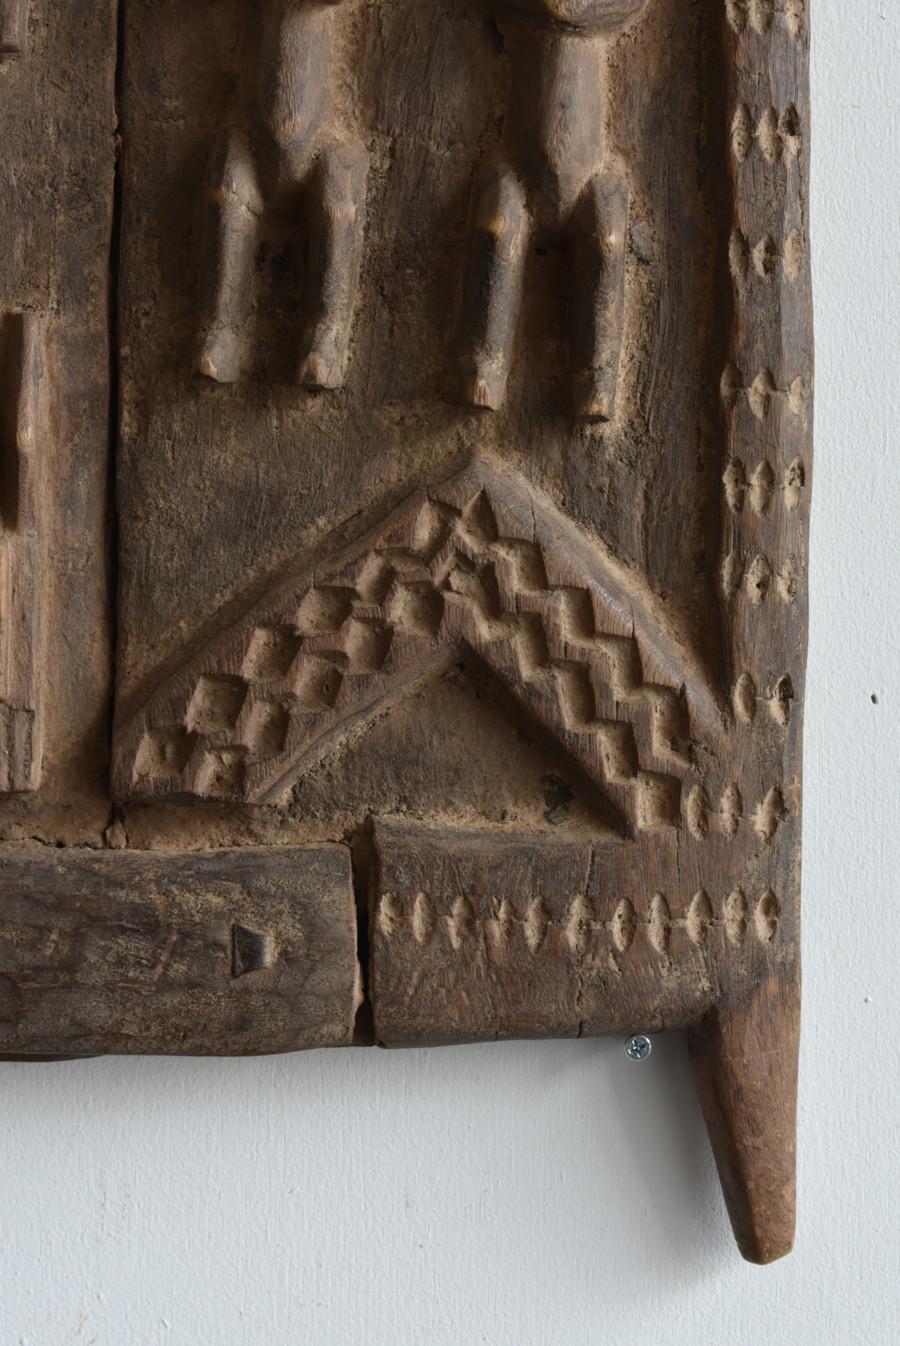 Hand-Carved African Dogon door/20th century/wall hanging object/tribal sculpture